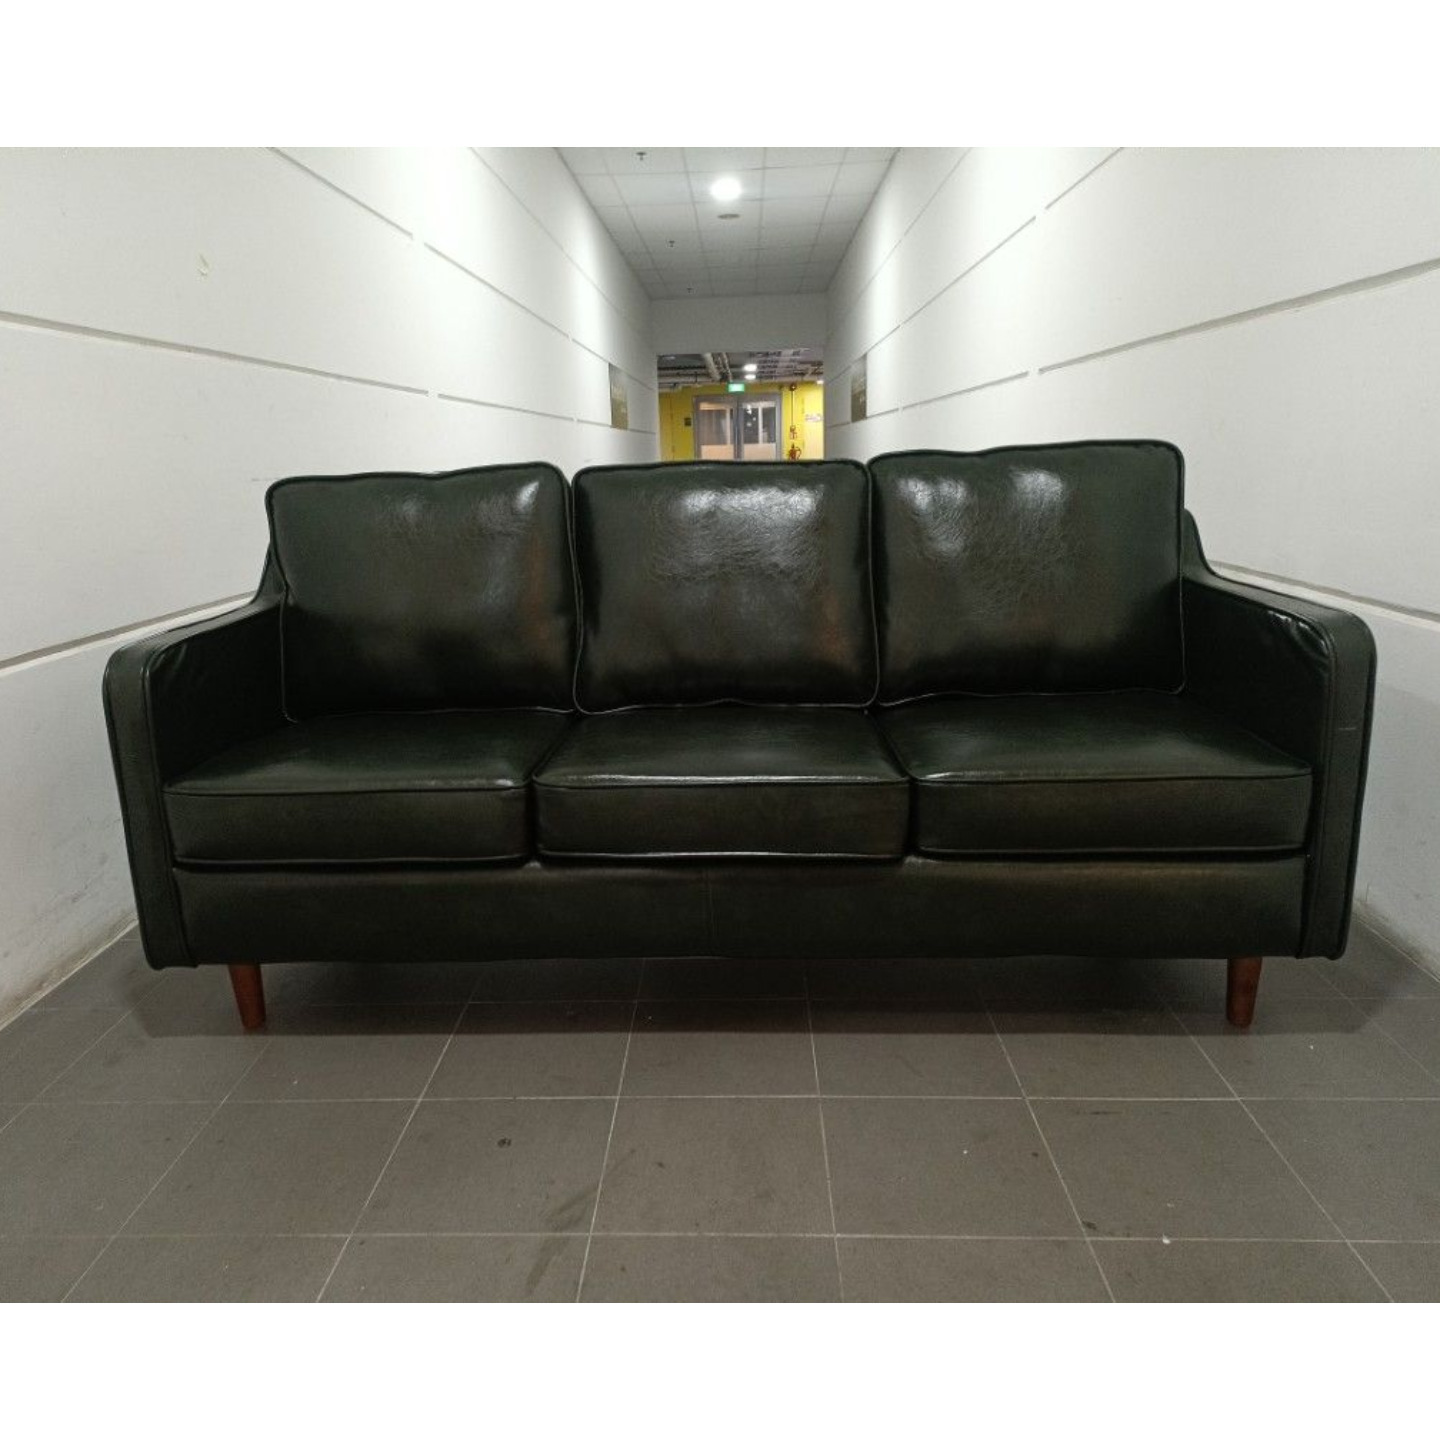 PRE ORDER VALENTE DESIGNS 3 Seater Sofa in EMERALD GREEN PU - Estimated Delivery by End of May 2023